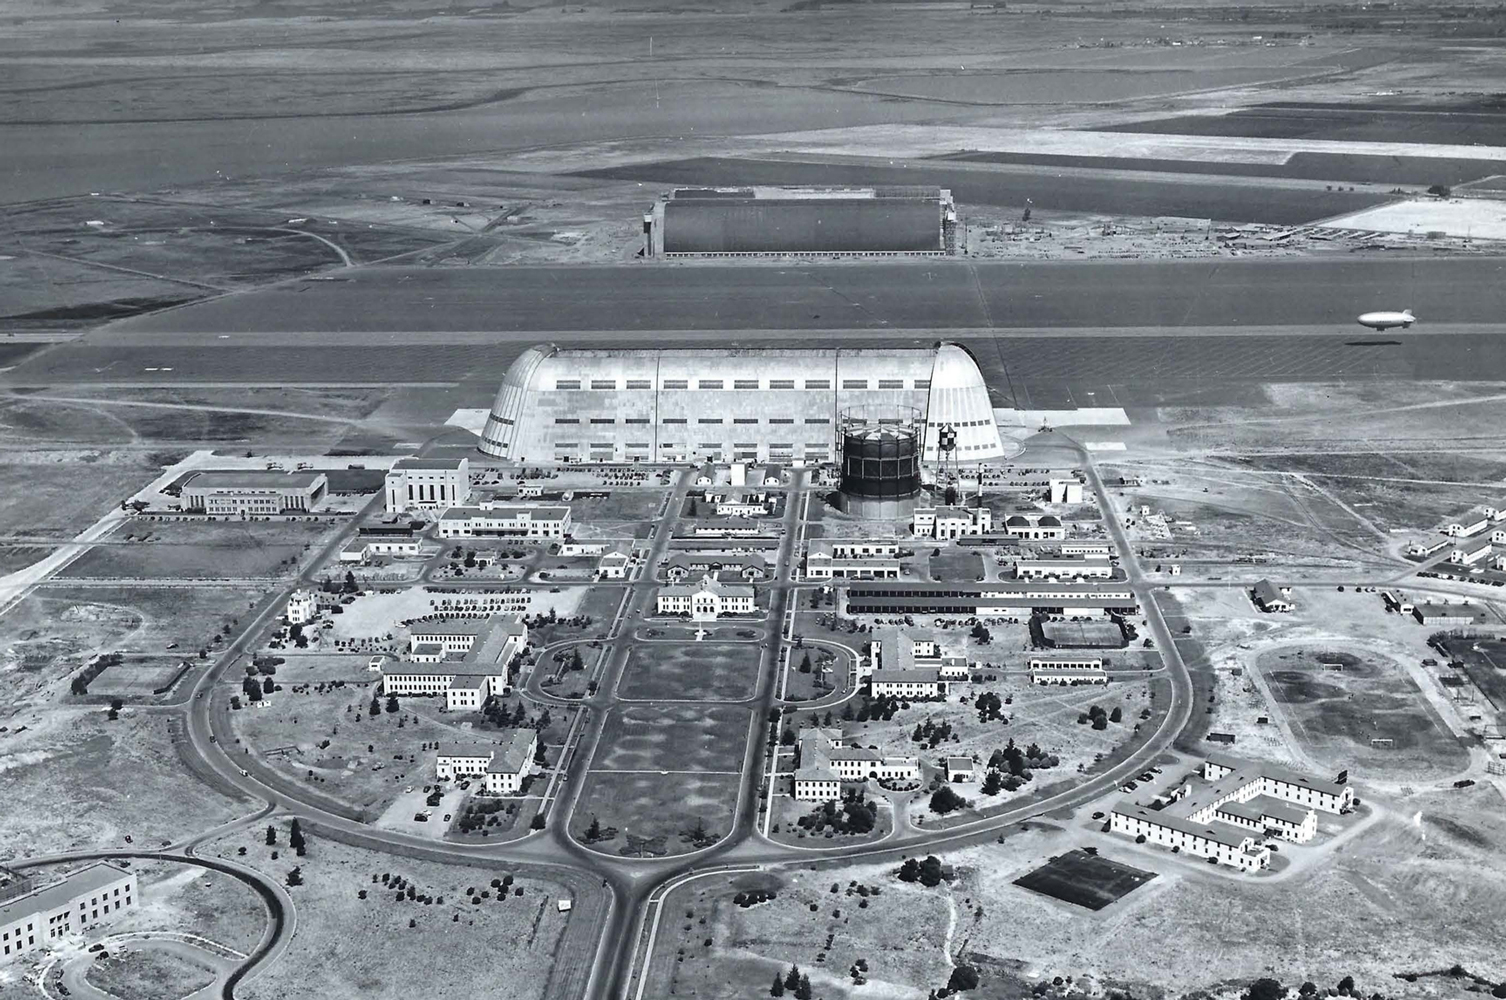 A birds-eye view of Hangar 1 and other buildings organized around a central lawn. A blimp takes off from the runway between Hangar 1 and Hangars 2 and 3.